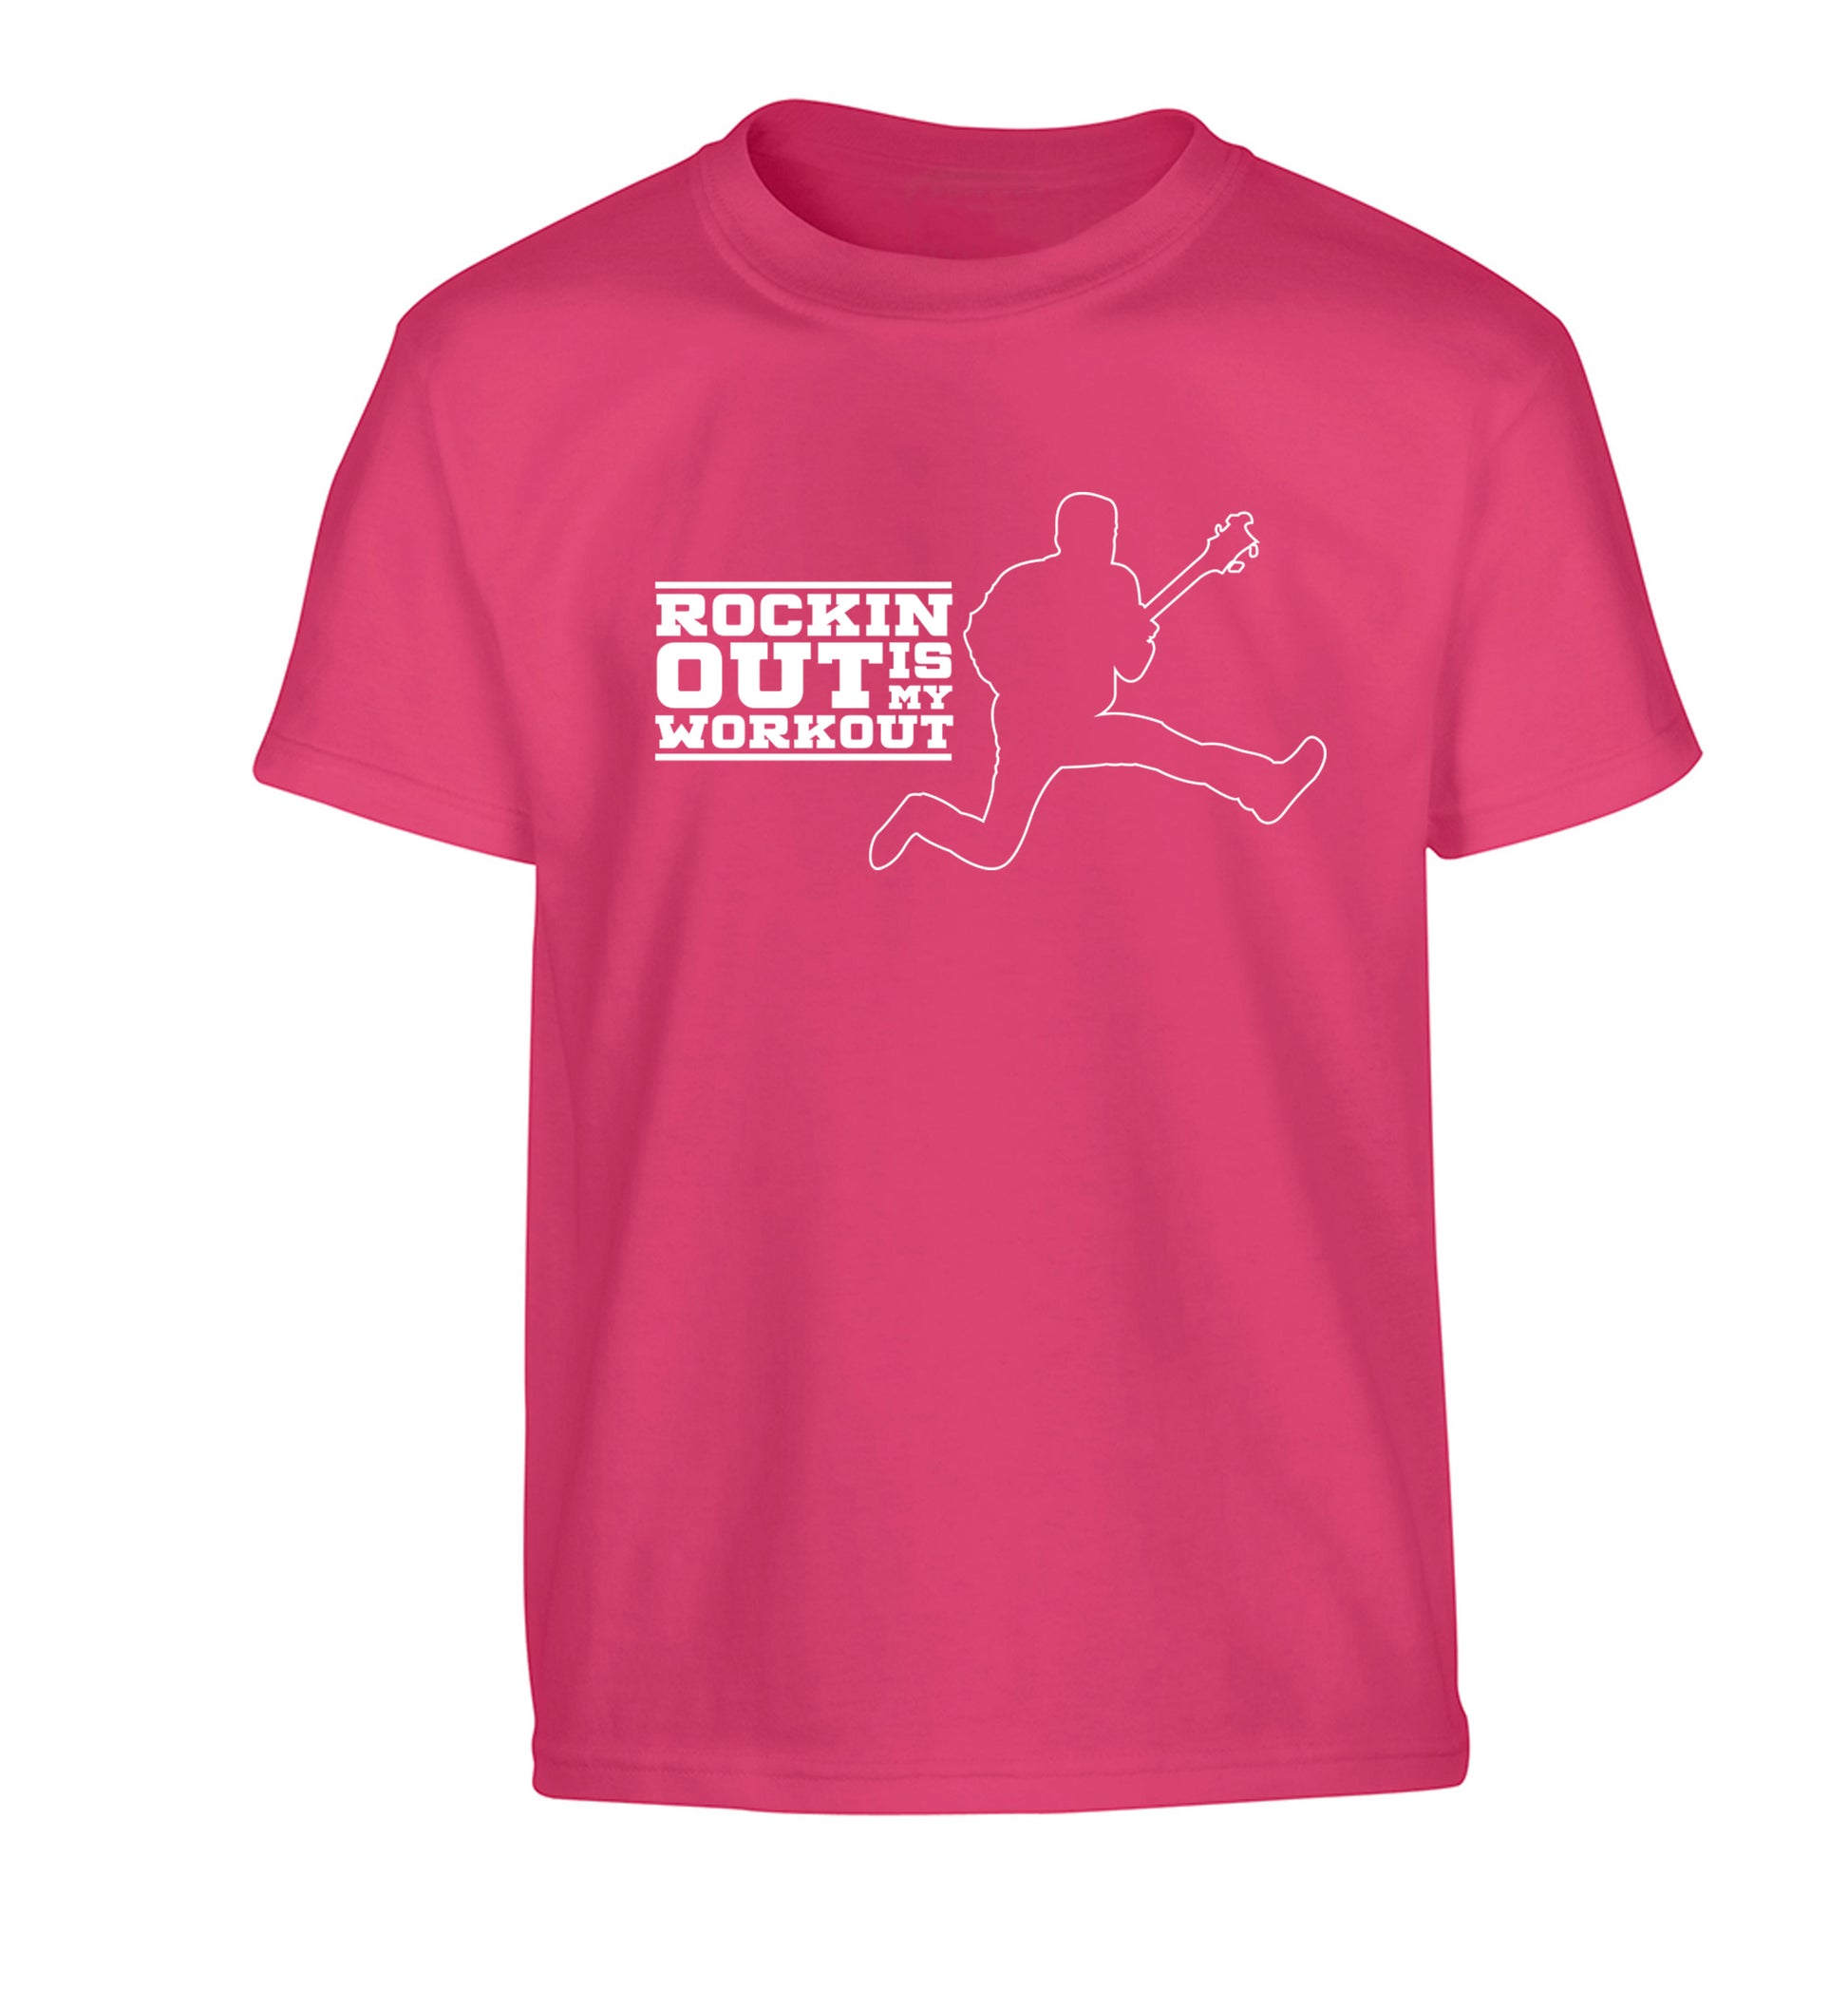 Rockin out is my workout Children's pink Tshirt 12-13 Years